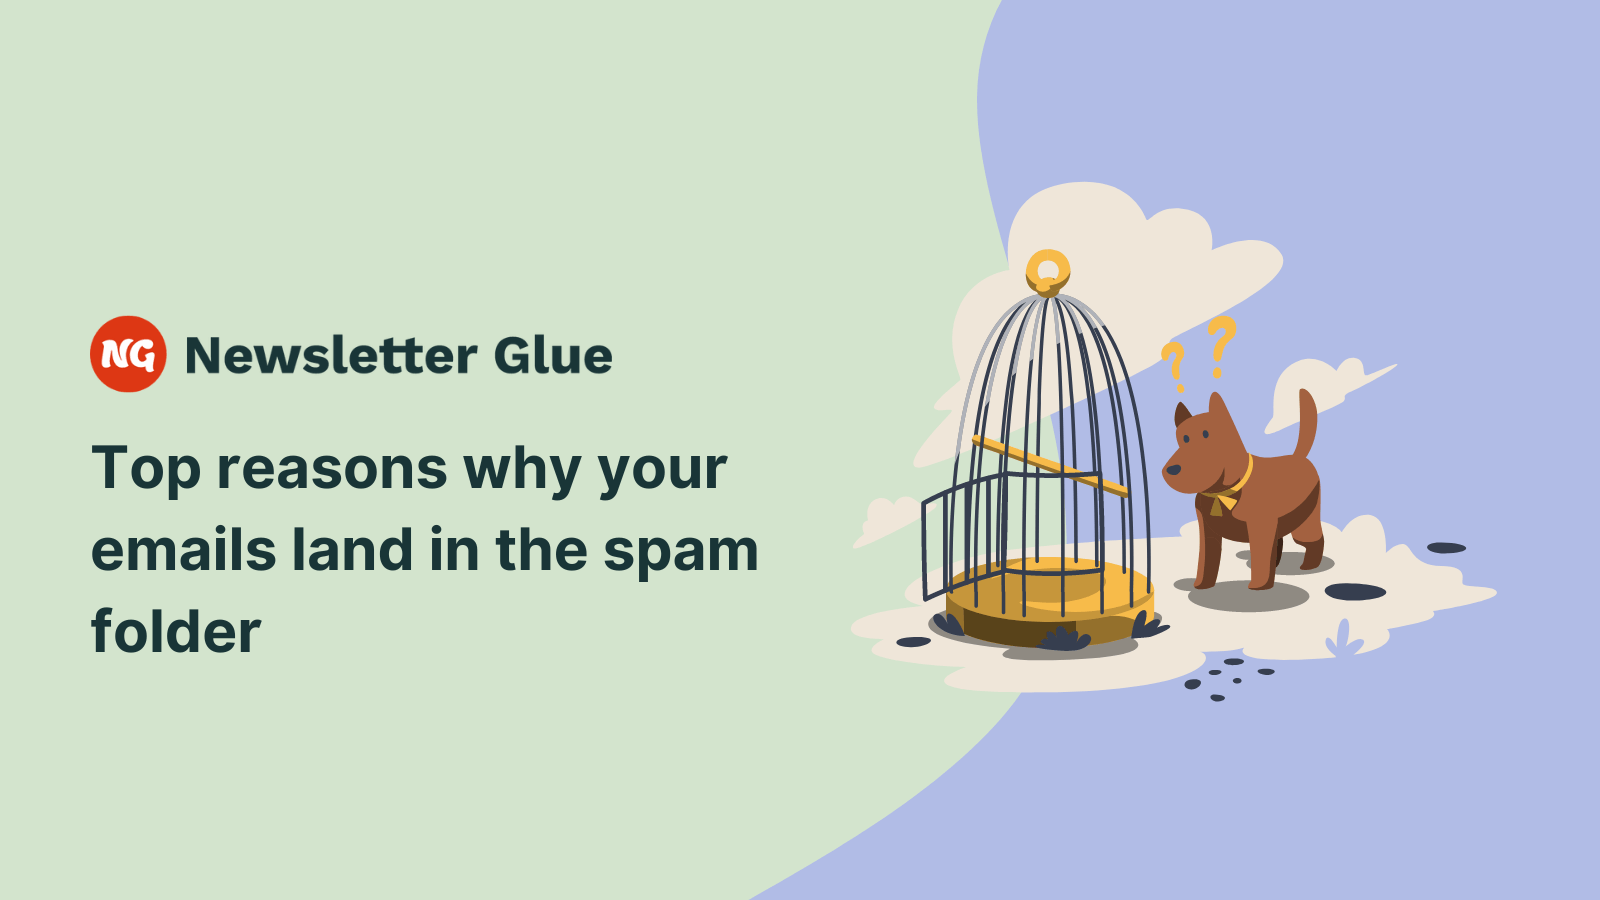 Top reasons why your emails land in the spam folder